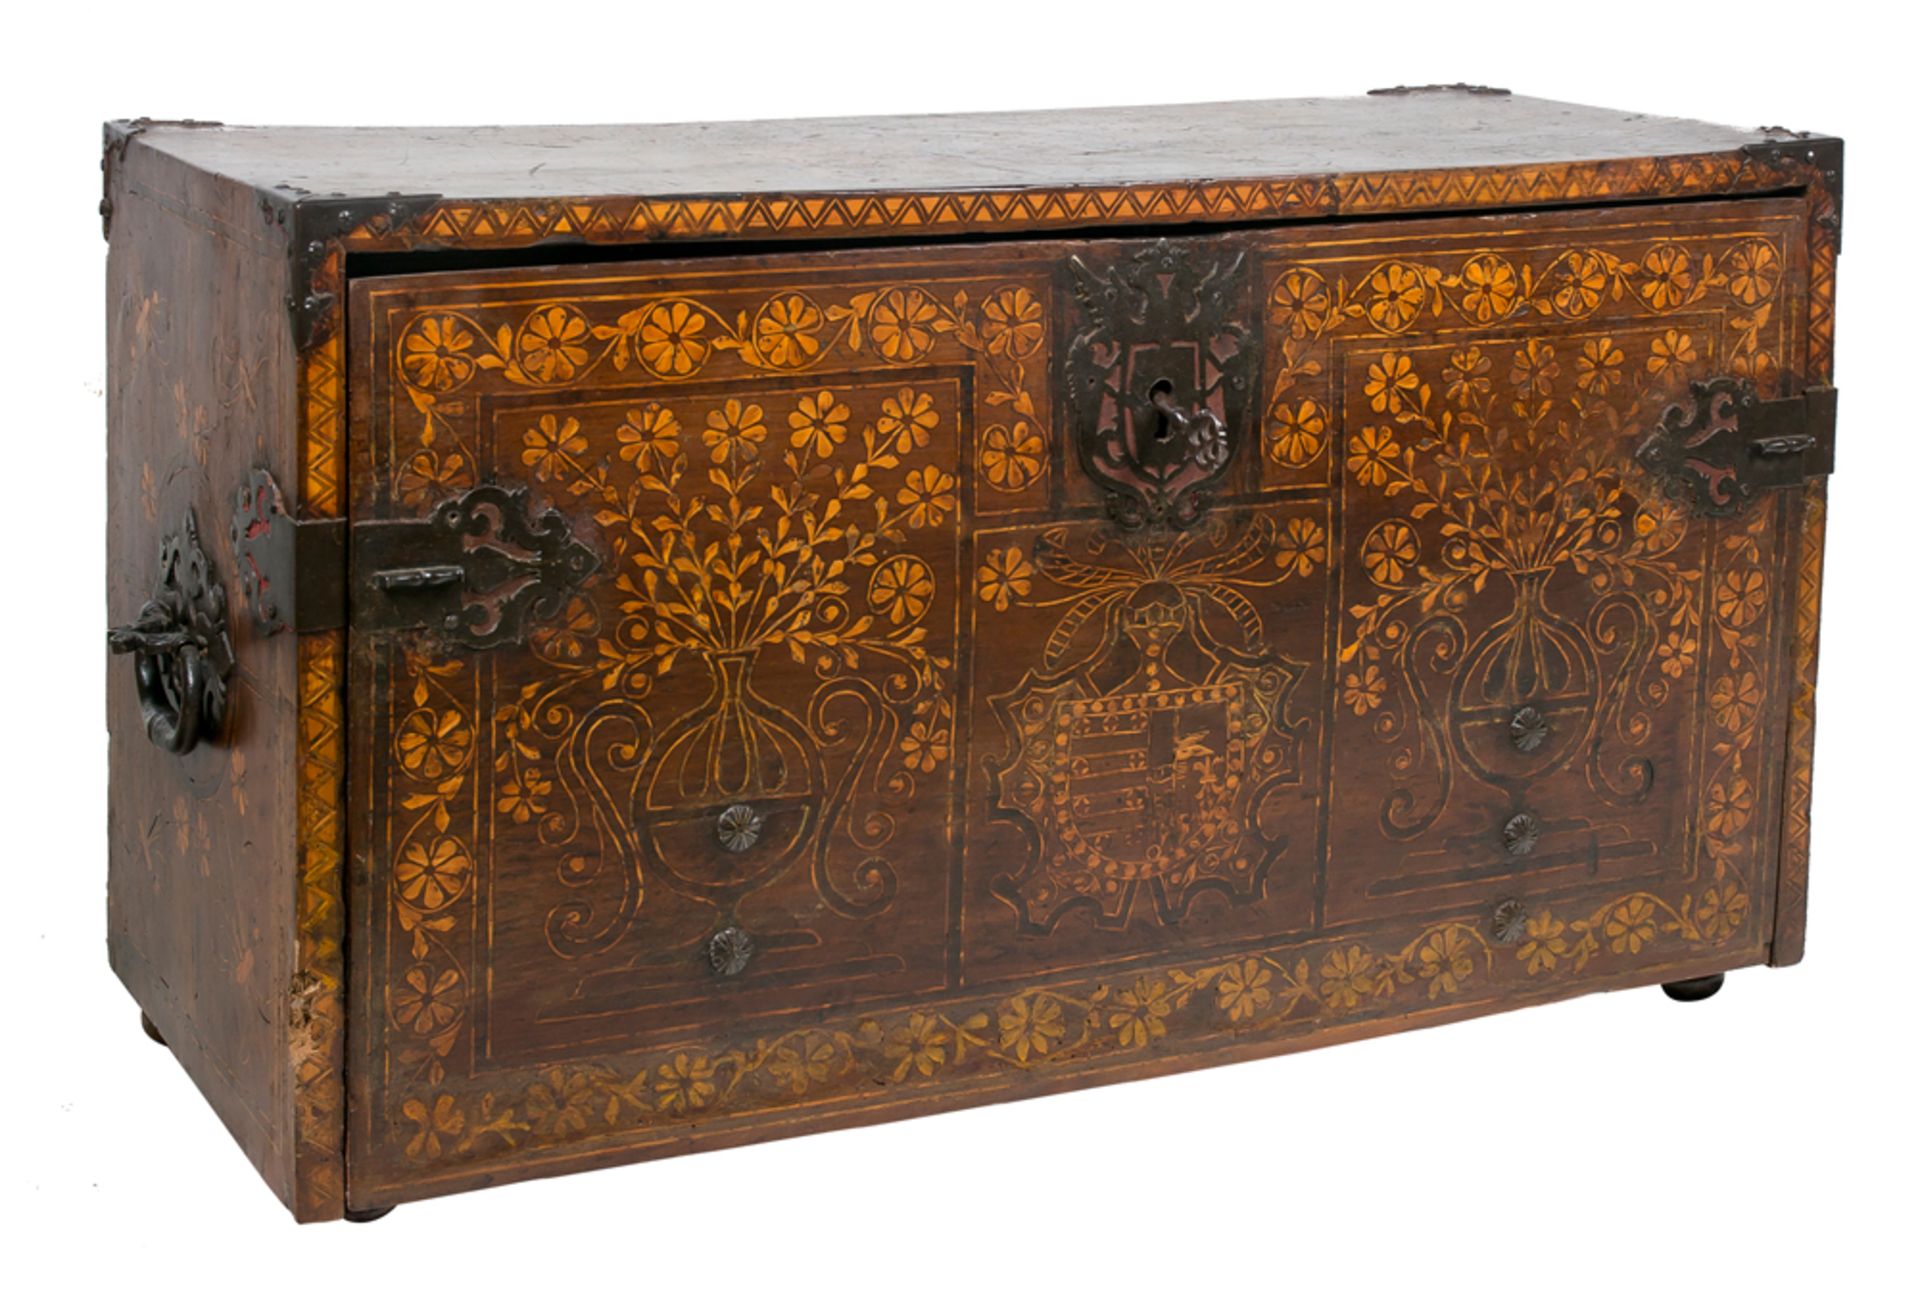 Wooden bargueño desk with bone incrustations and iron fittings. Asturias, Spain. 17th century.